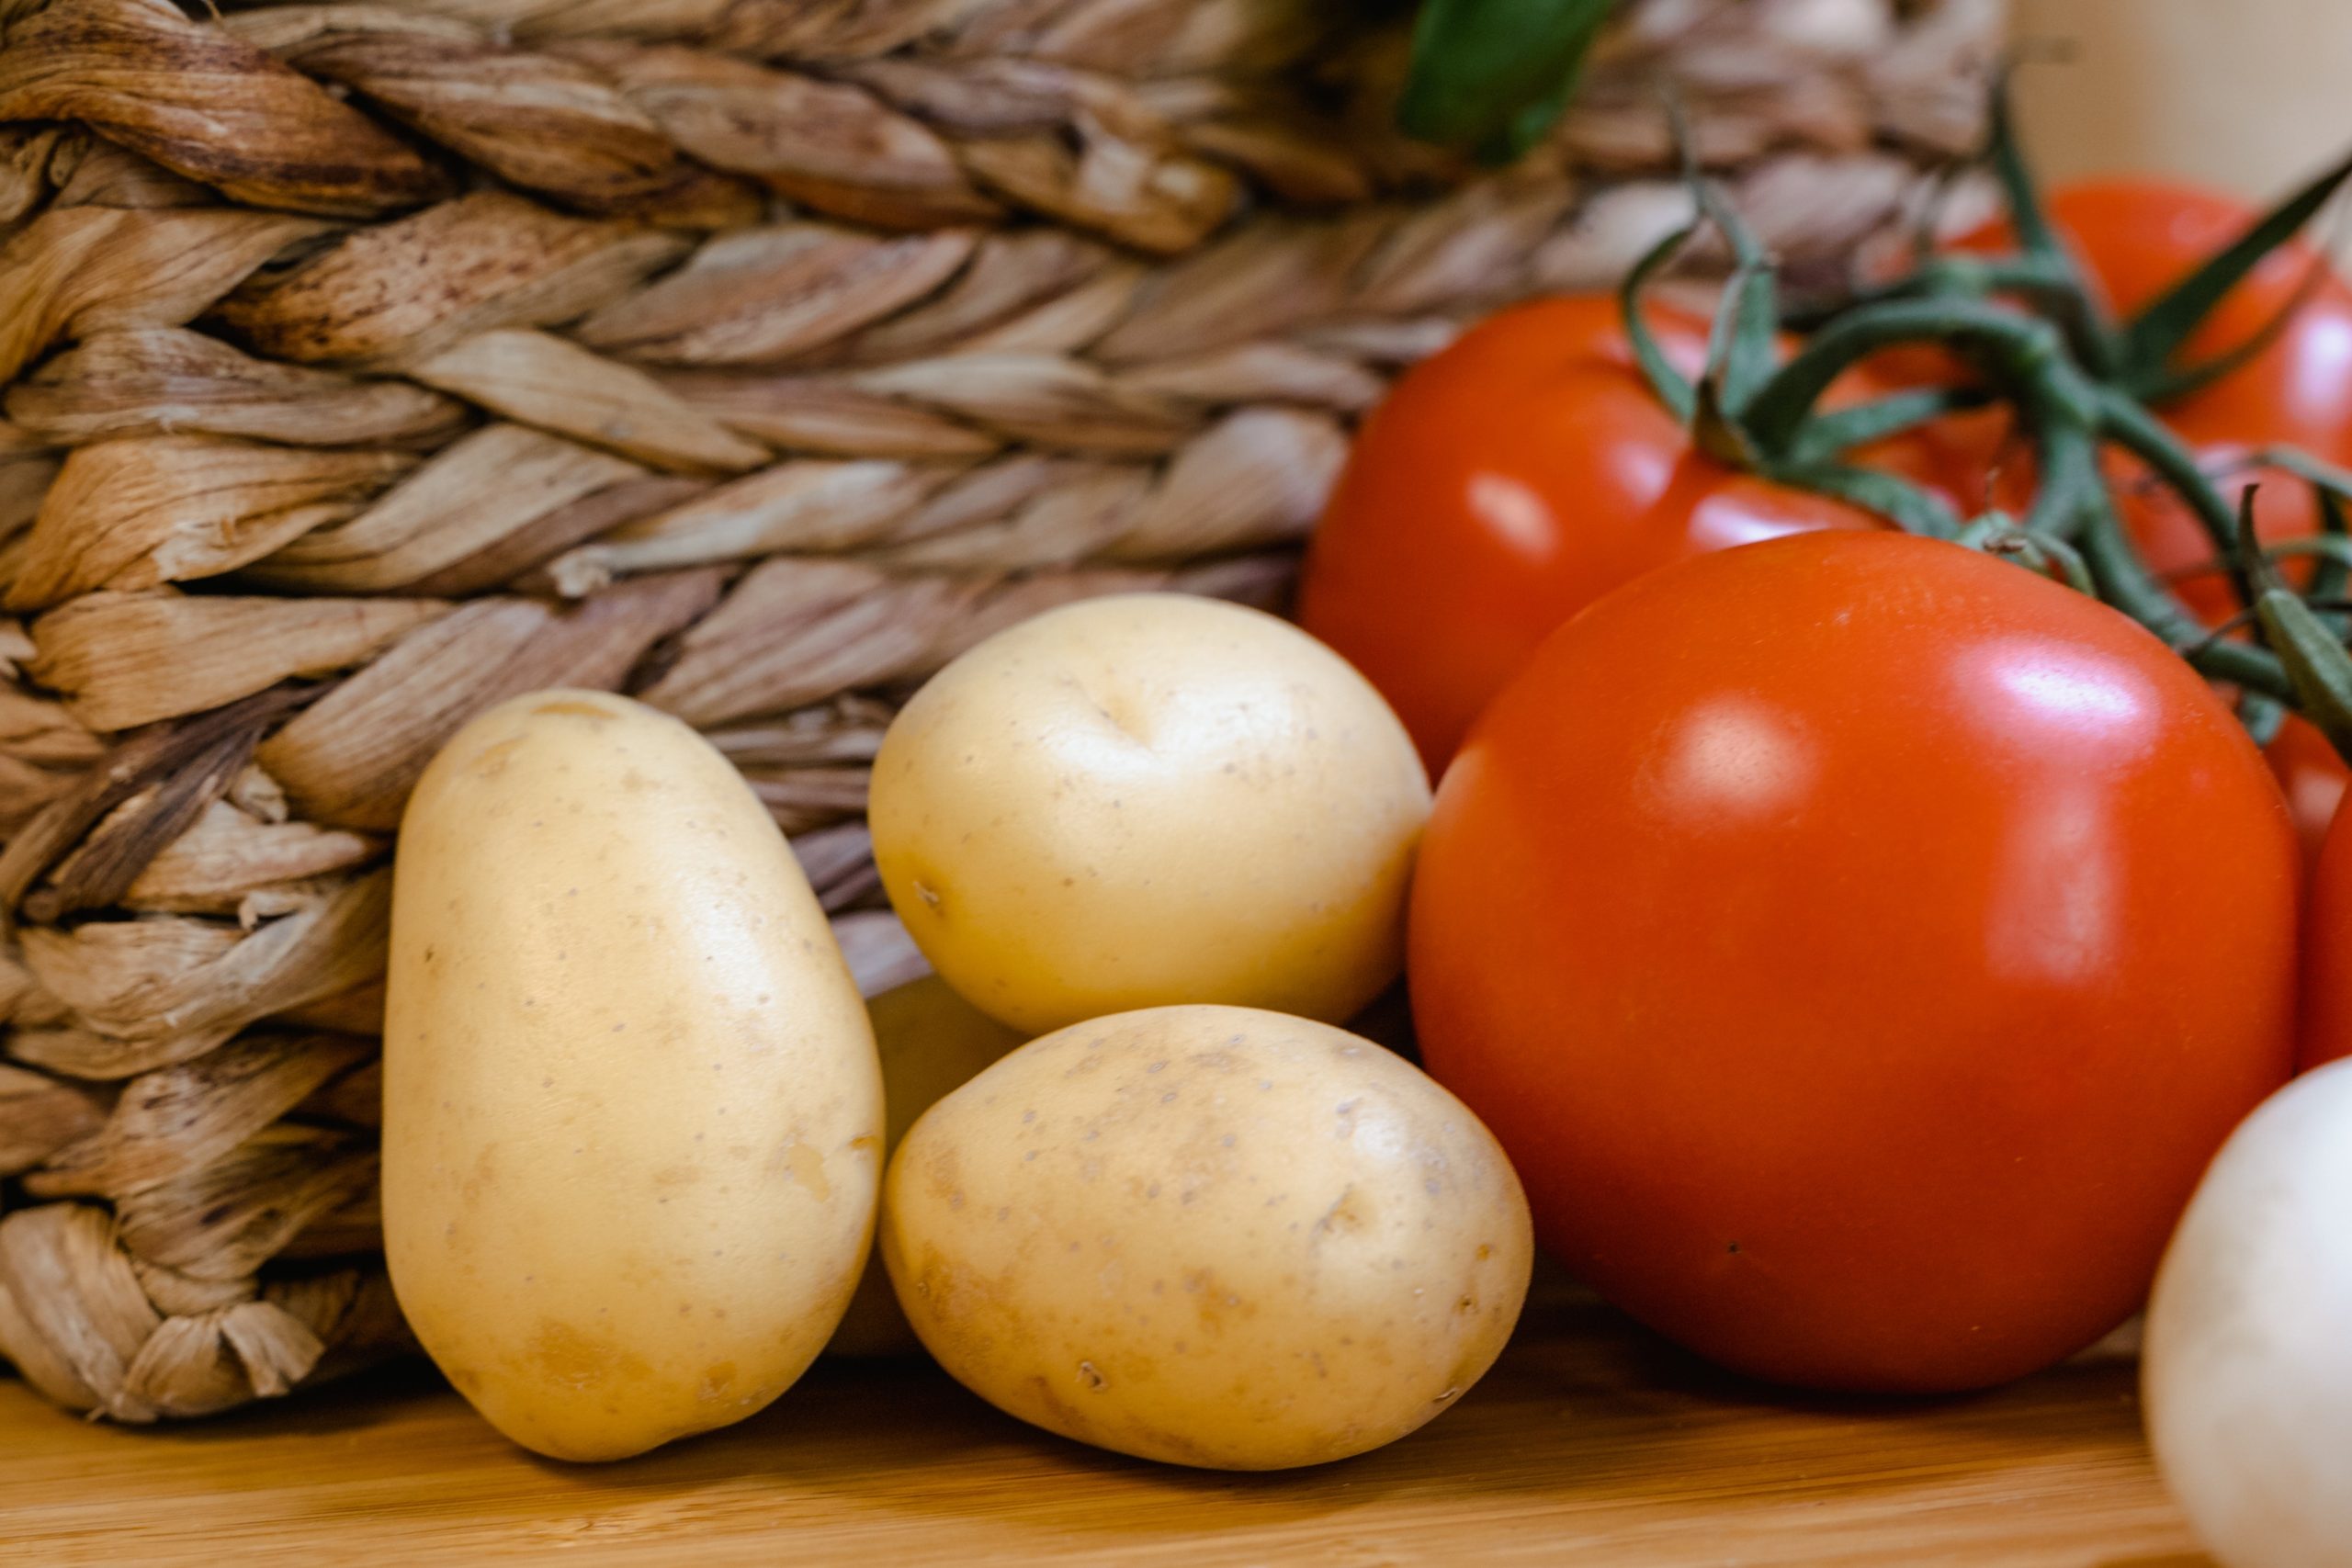 potatoes and tomatoes are part of the night shade family. They can make you sick if you are allergic. Here's how to know.